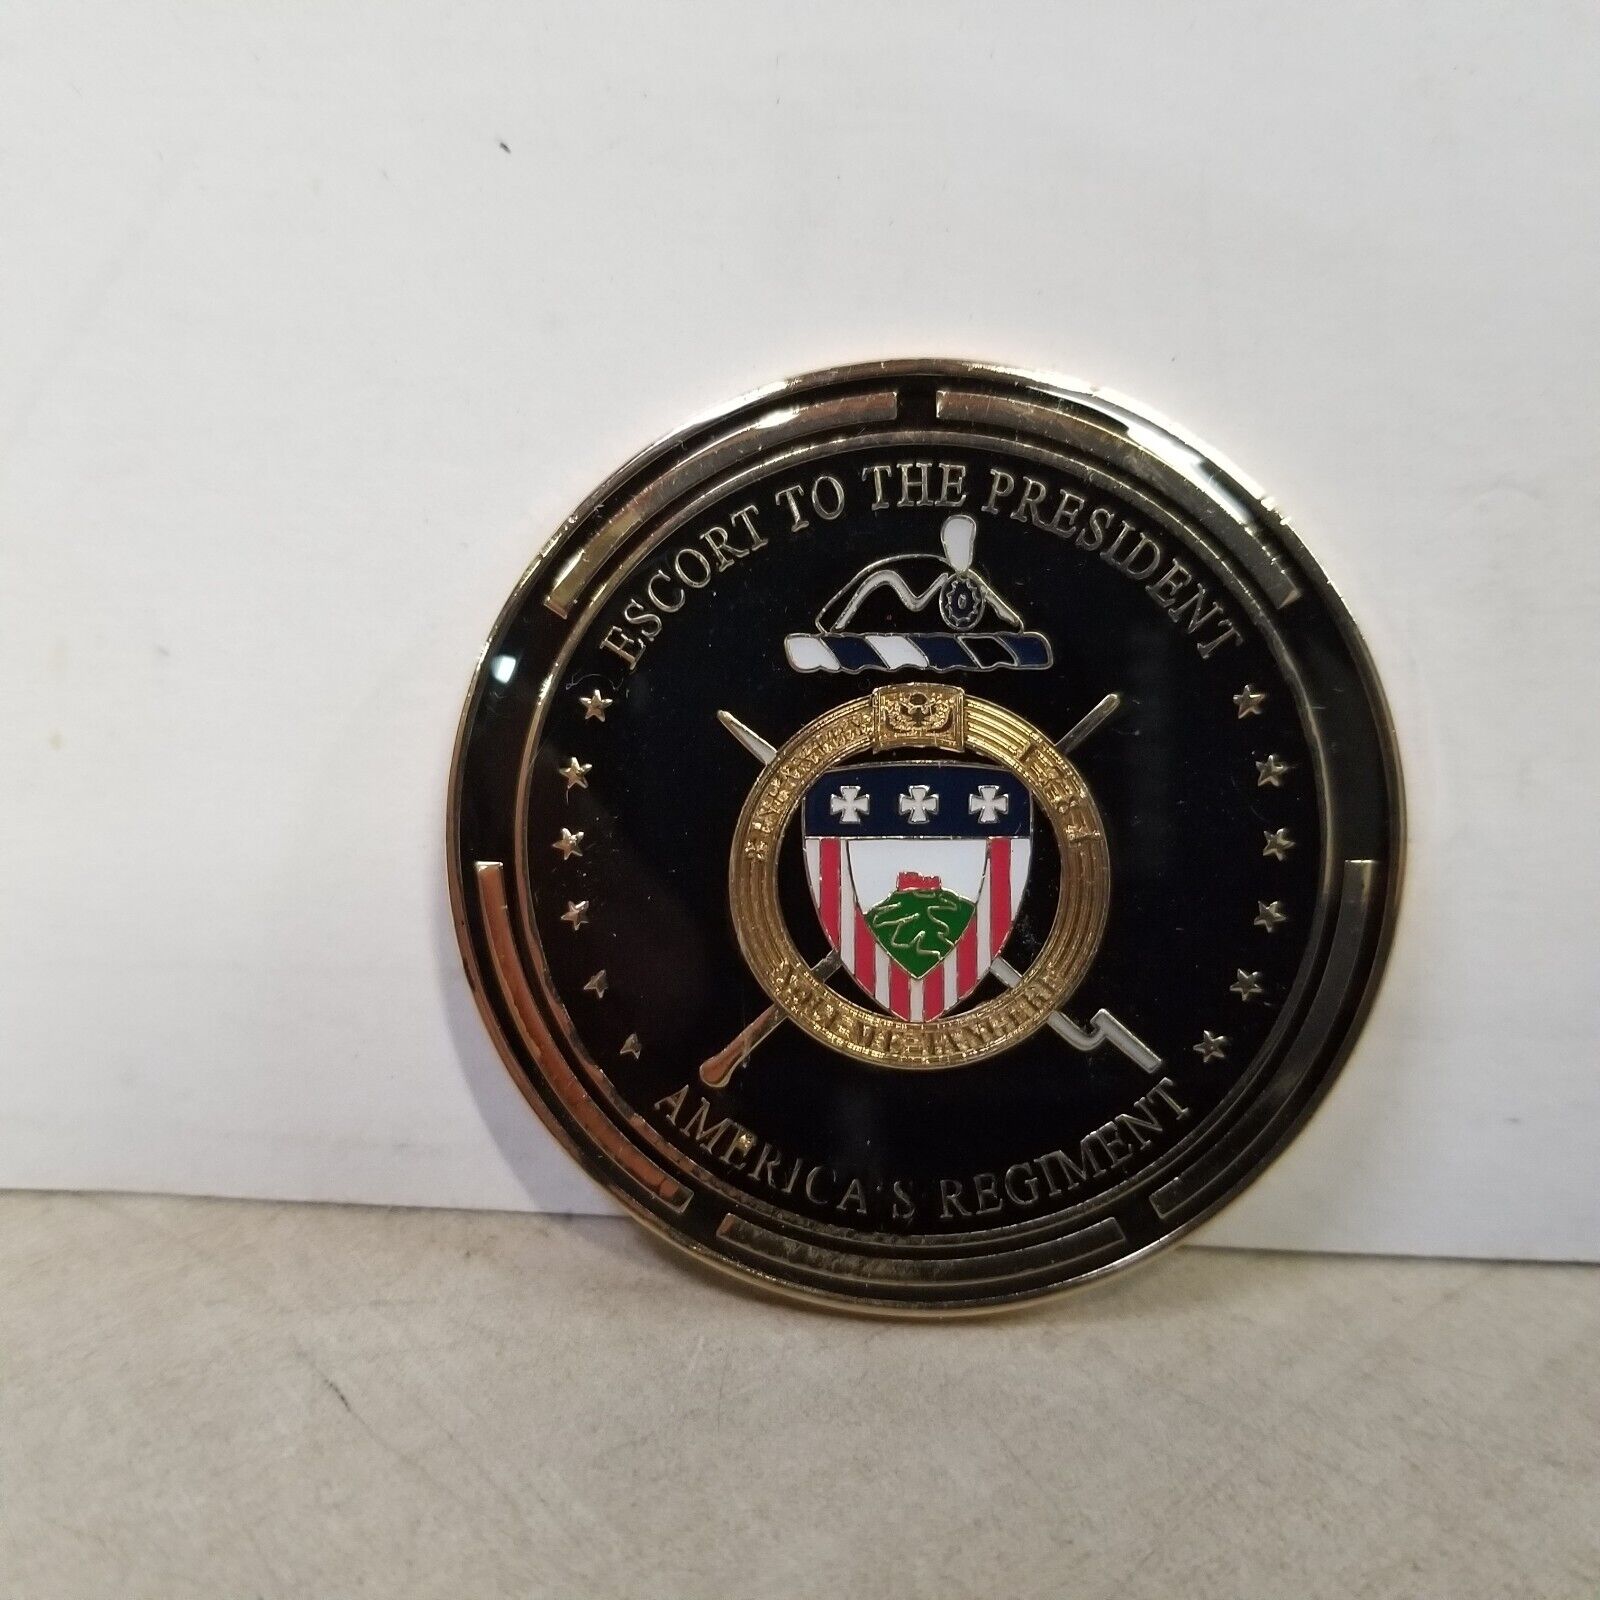 Escort To The President America Regiment Awarded For Honor Guard Challenge Coin